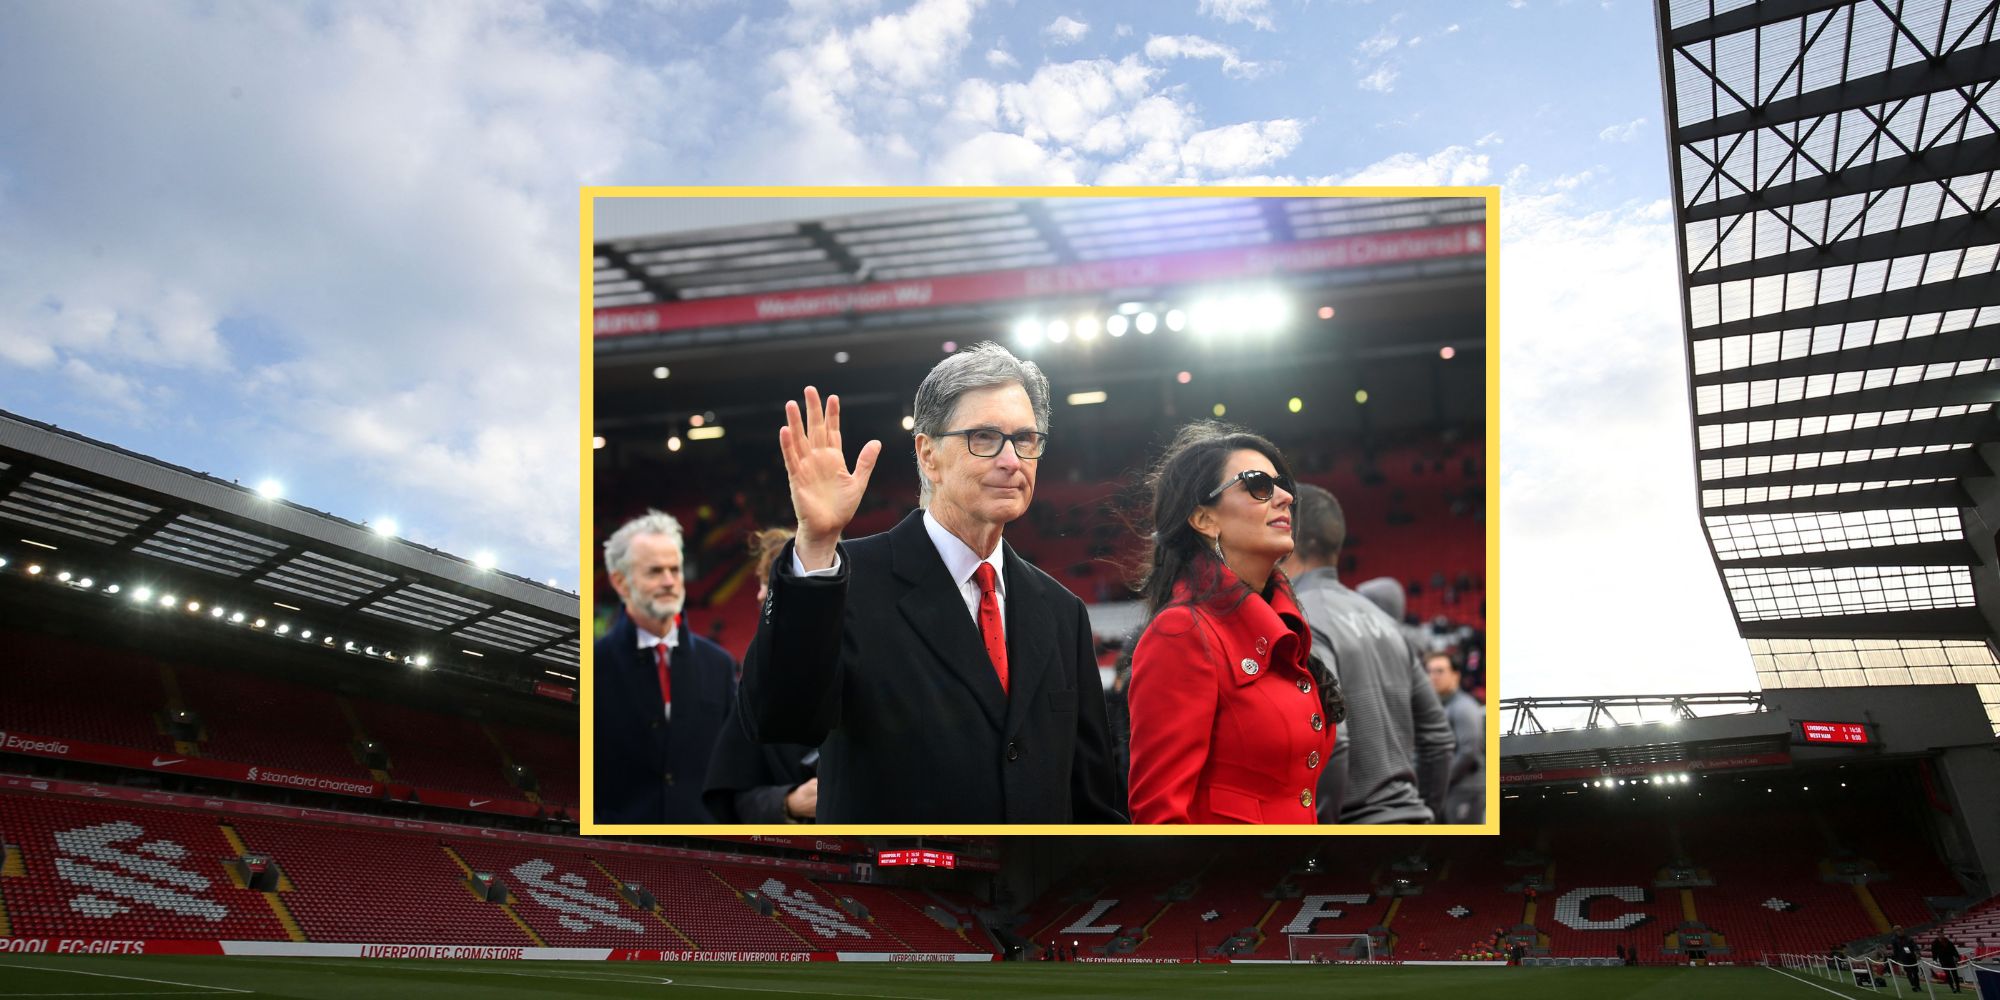 Neil Jones weighs in on likelihood of FSG welcoming a full takeover of Liverpool